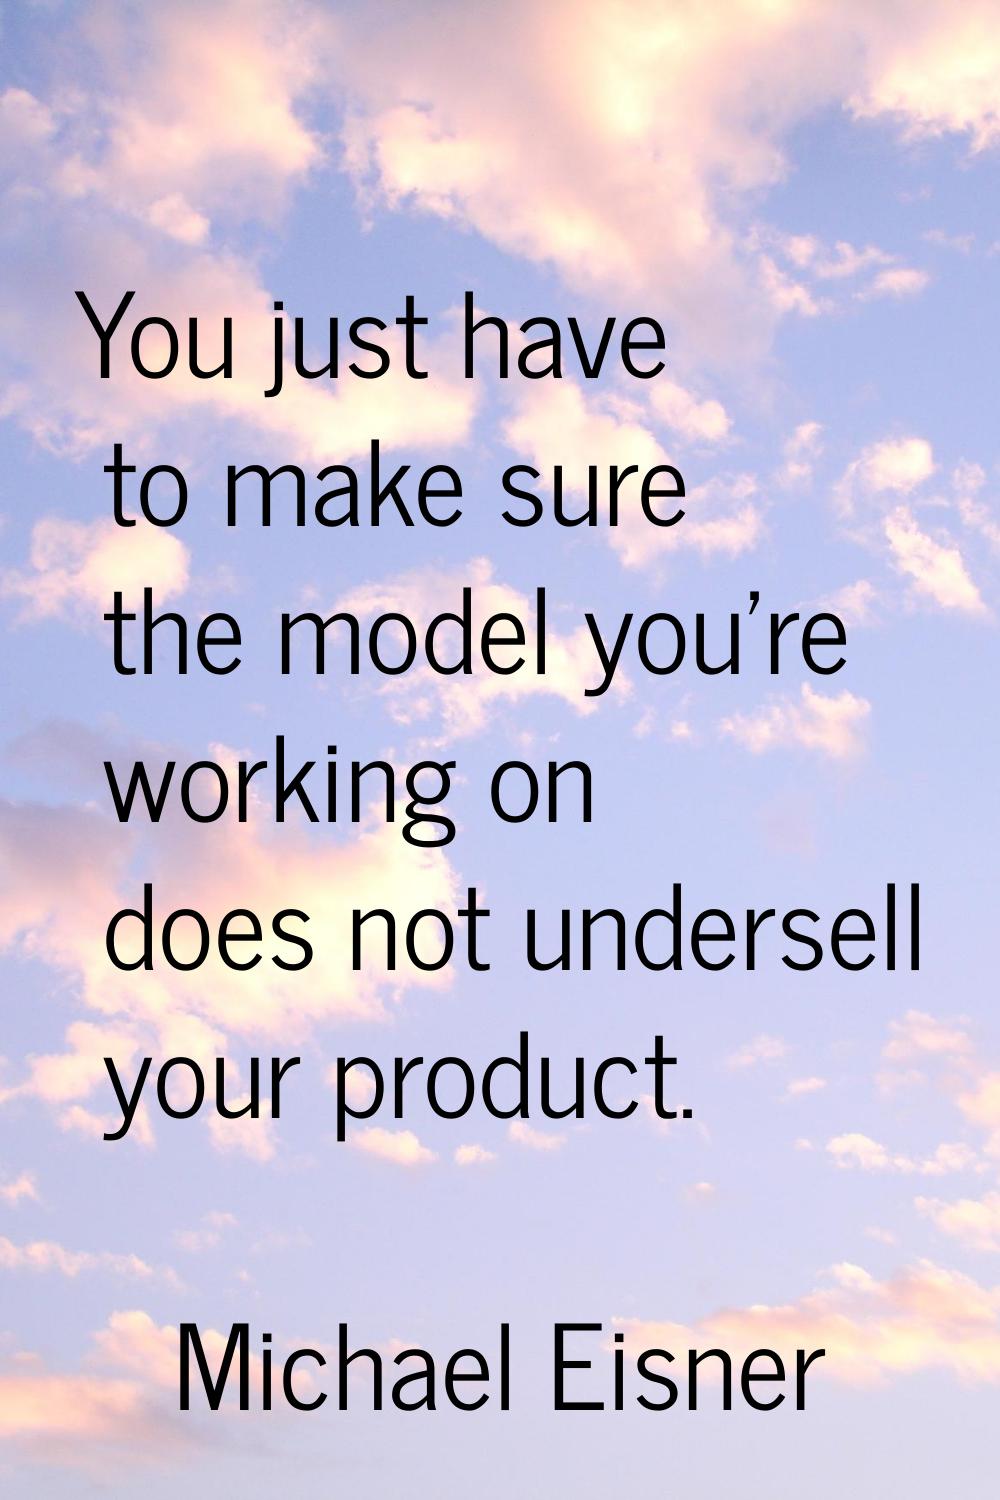 You just have to make sure the model you're working on does not undersell your product.